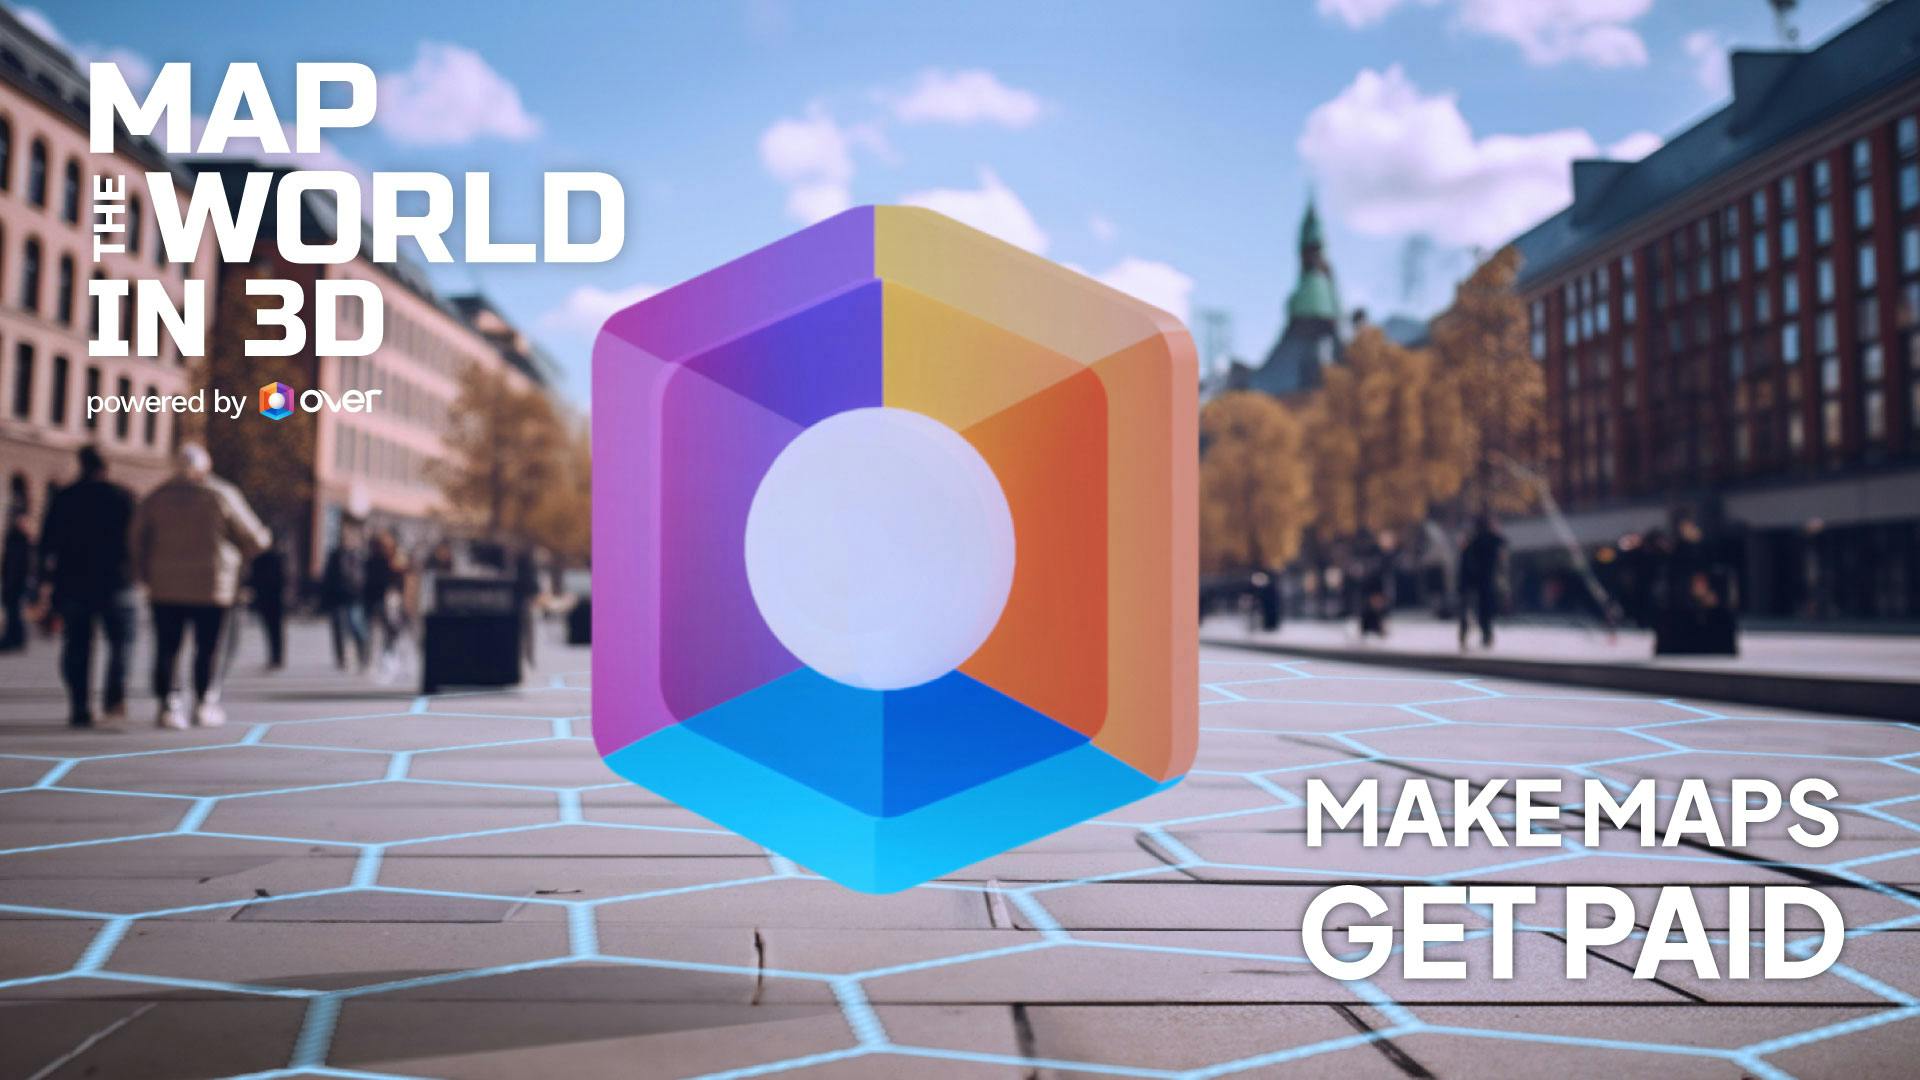 How to earn rewards when you Map The World in 3D